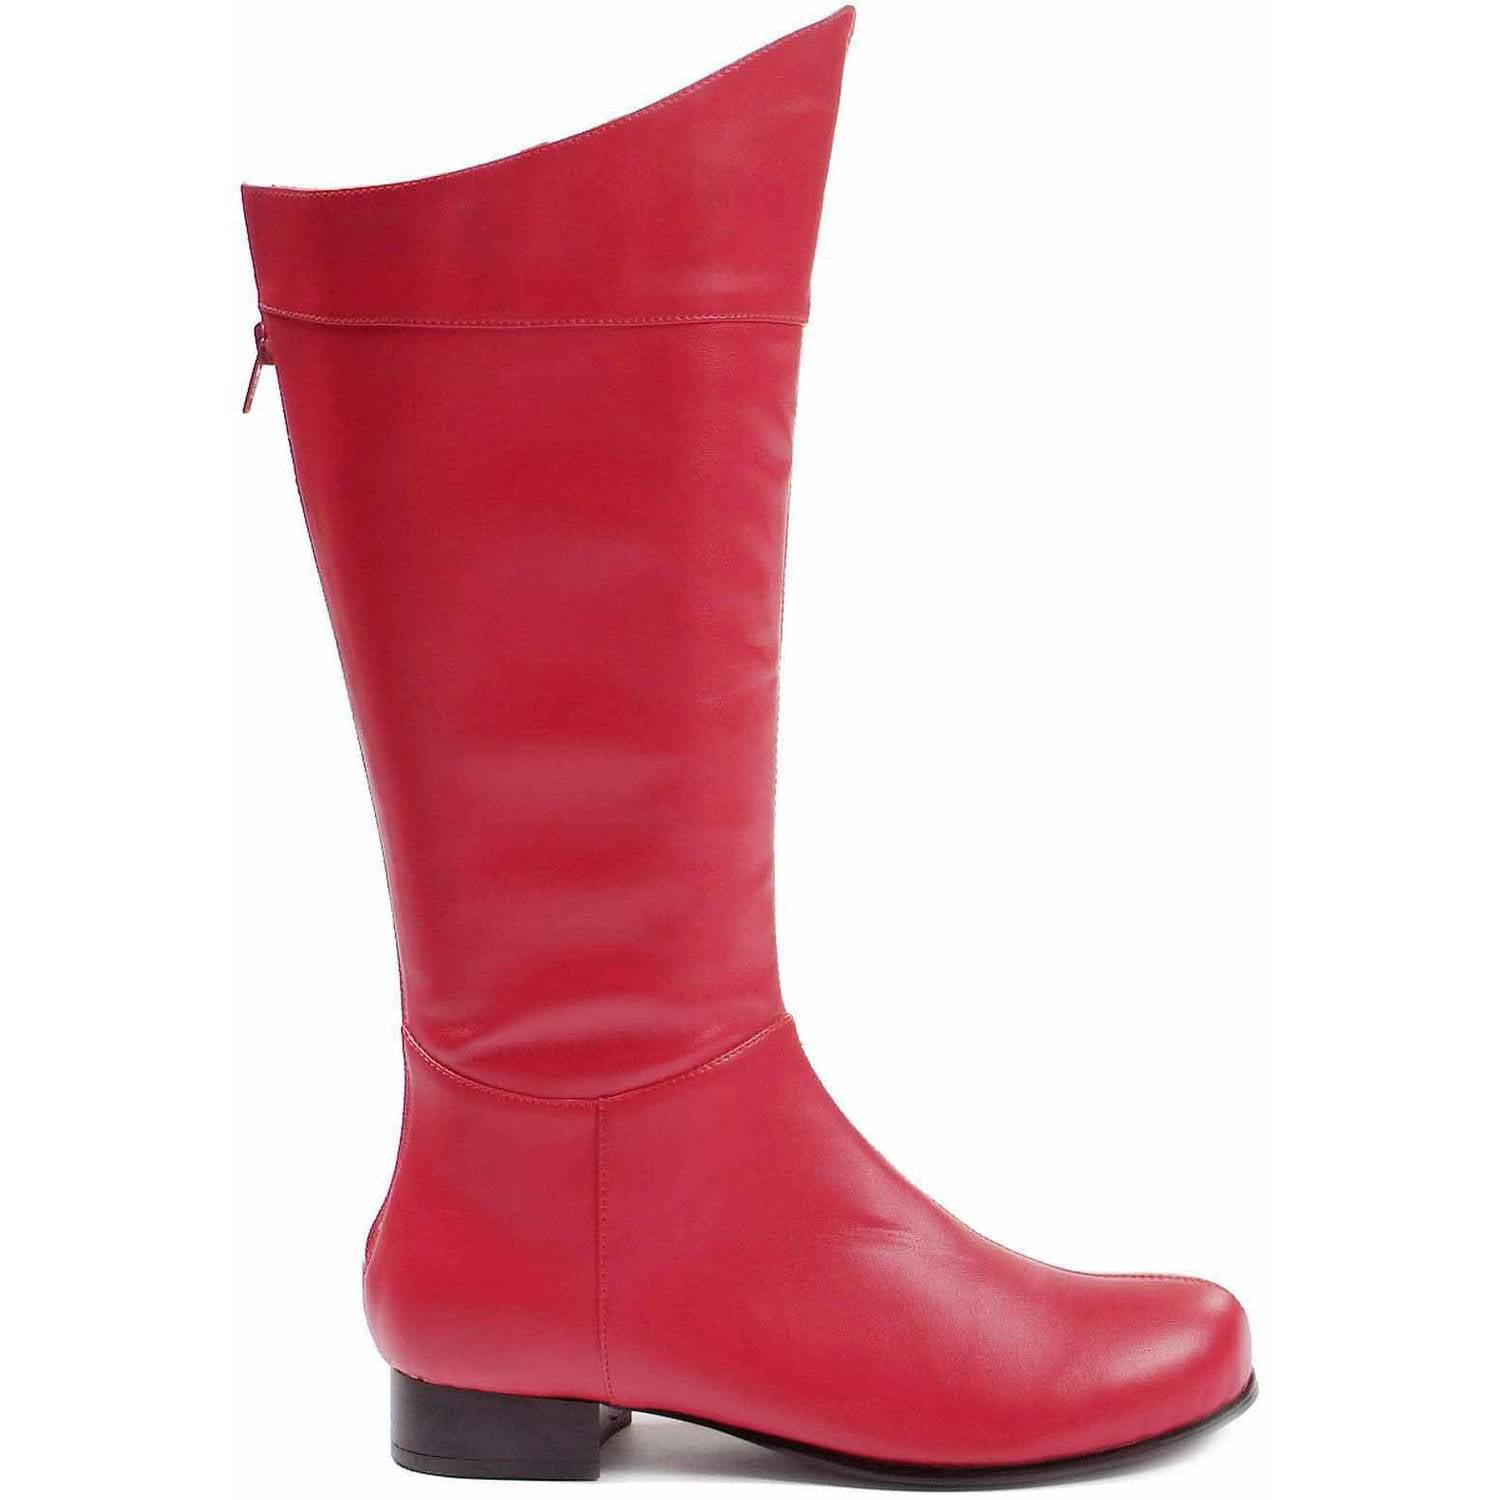 Captain Shoes Deluxe Red PU Boots Fashion Cosplay Costume Accessory